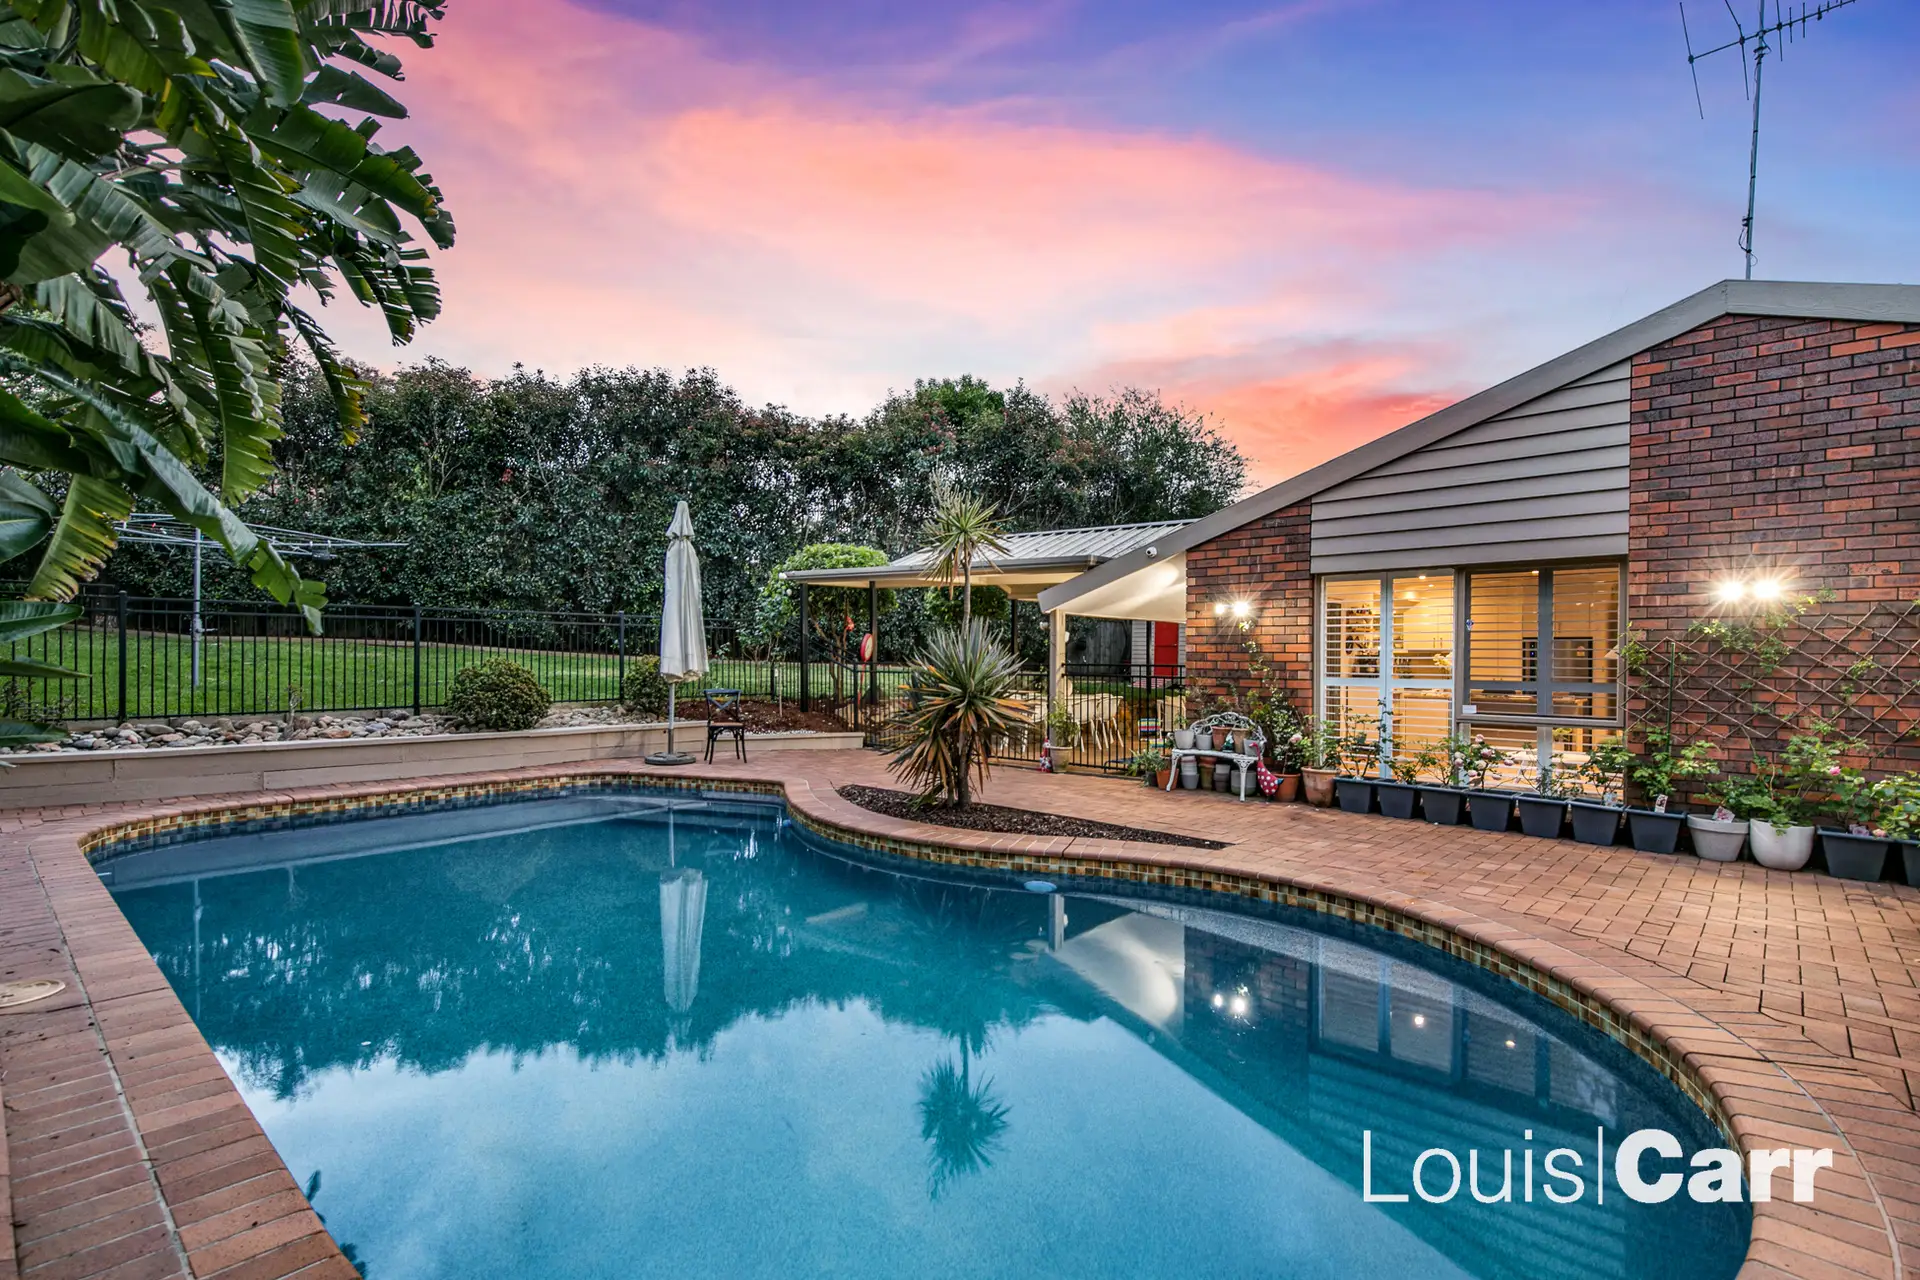 Photo #1: 8 Kalumna Close, Cherrybrook - Sold by Louis Carr Real Estate